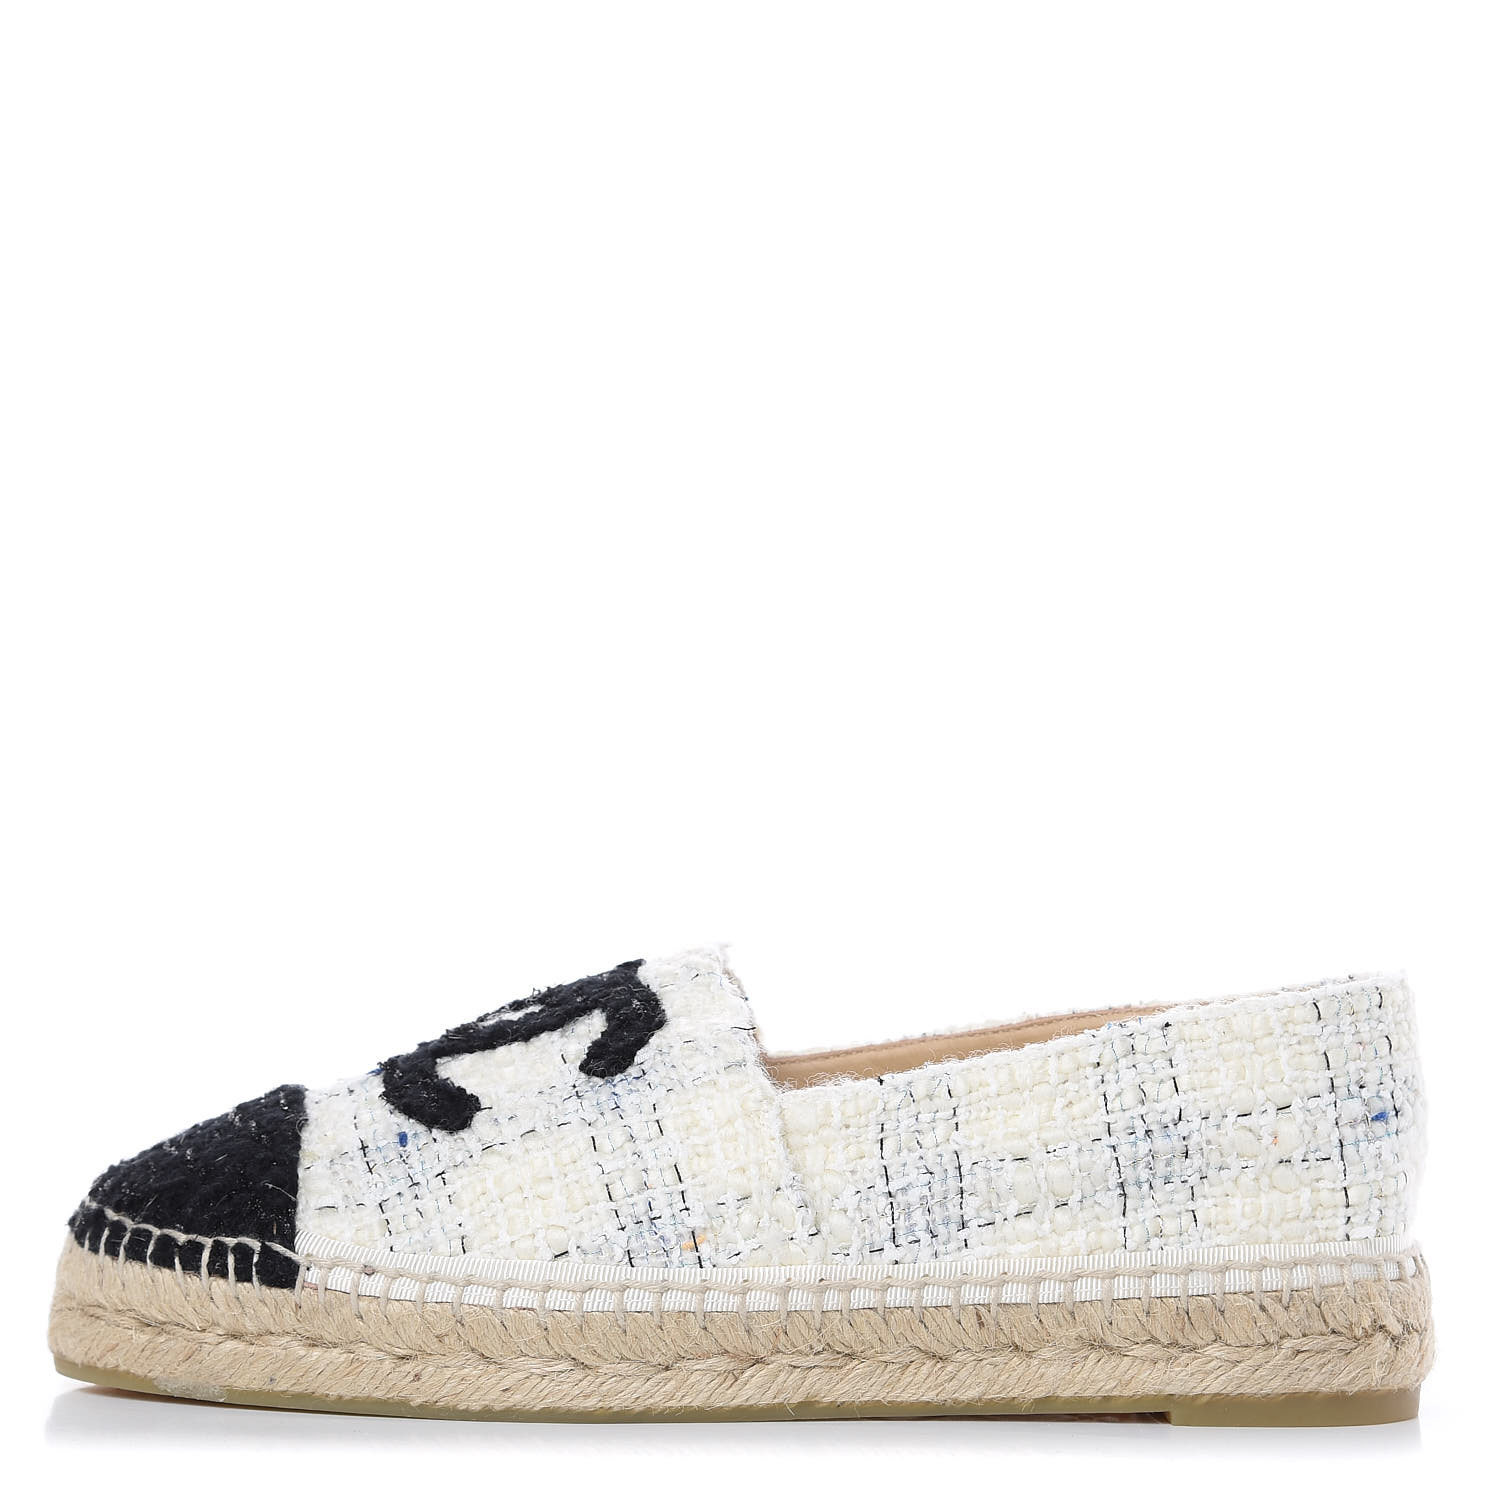 chanel espadrilles black and white